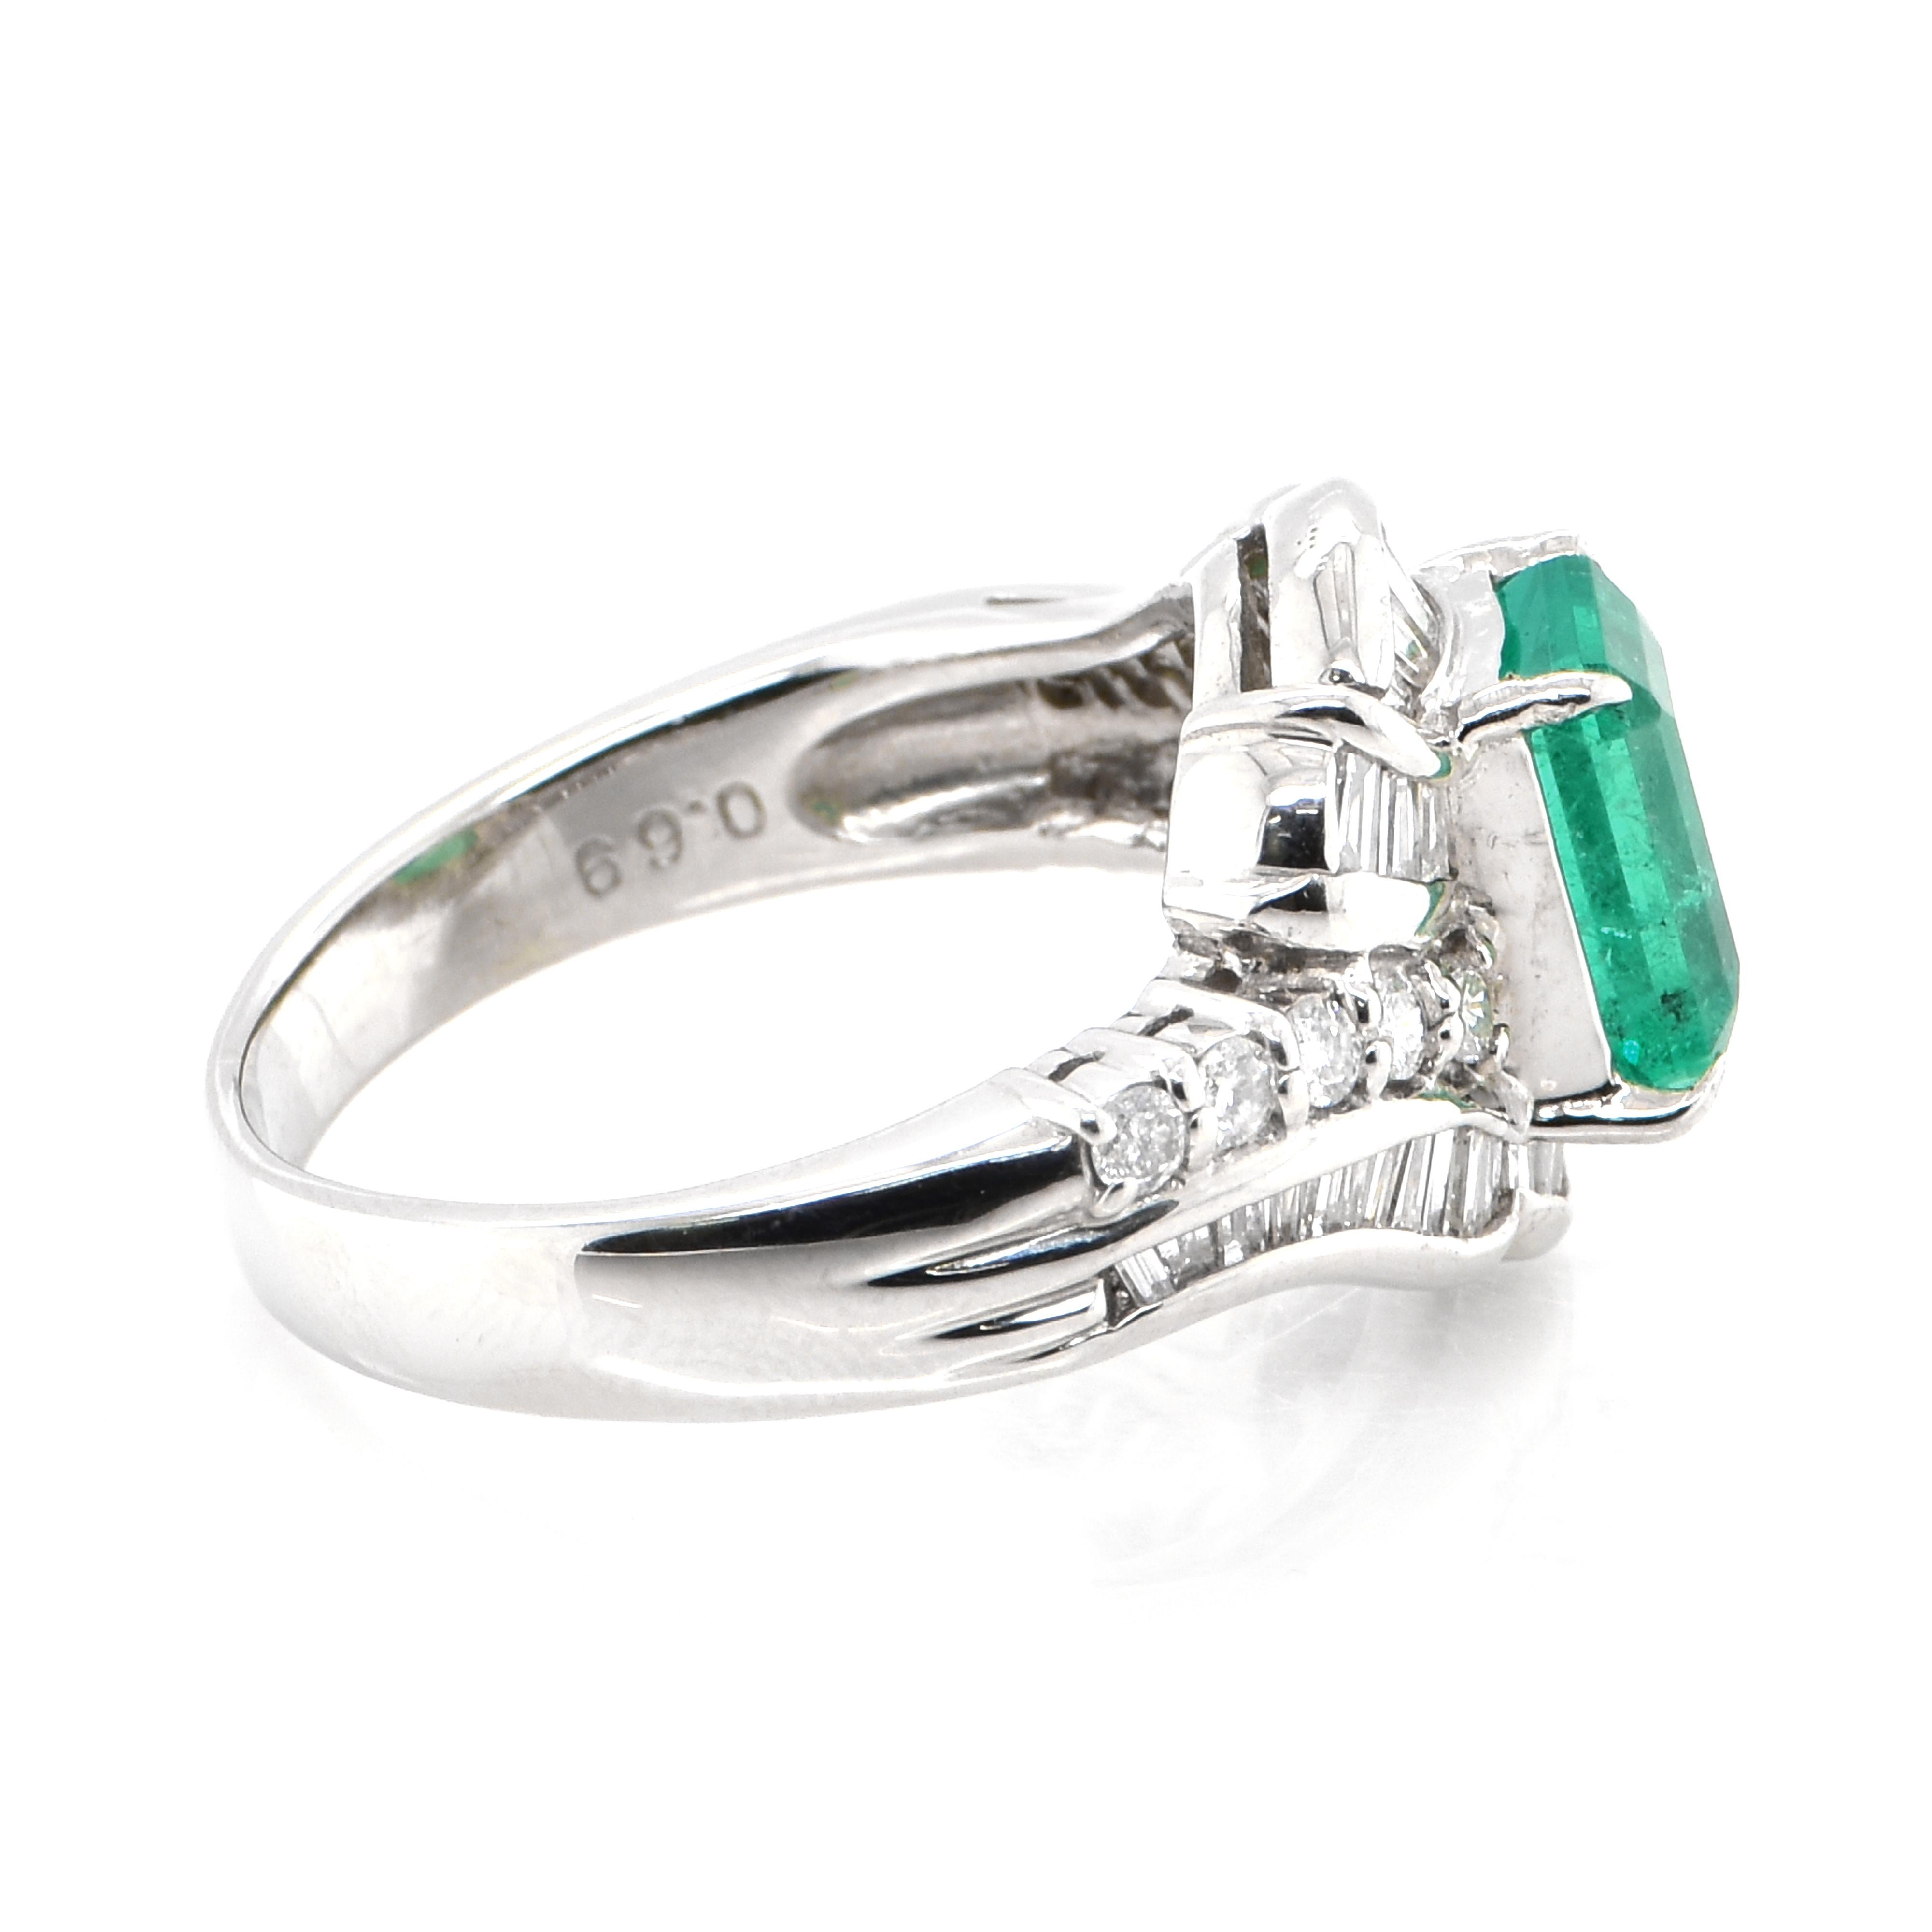 1.83 Carat Natural Emerald & Diamond Estate Cocktail Ring Made in Platinum In Excellent Condition For Sale In Tokyo, JP